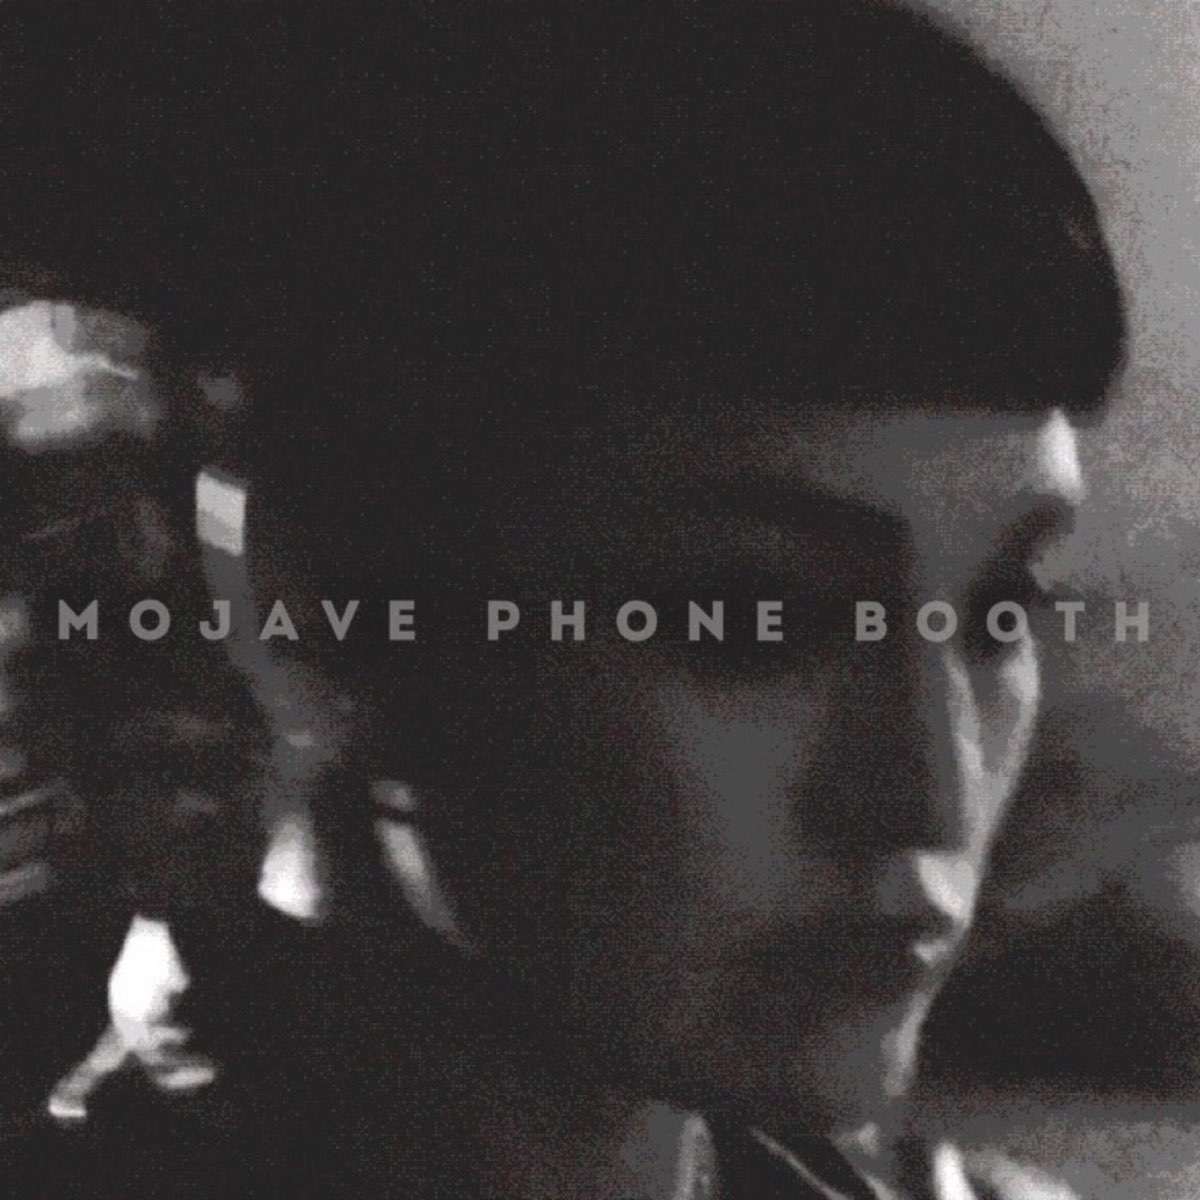 Mojave Phone Booth Kill the Messenger - EP cover artwork